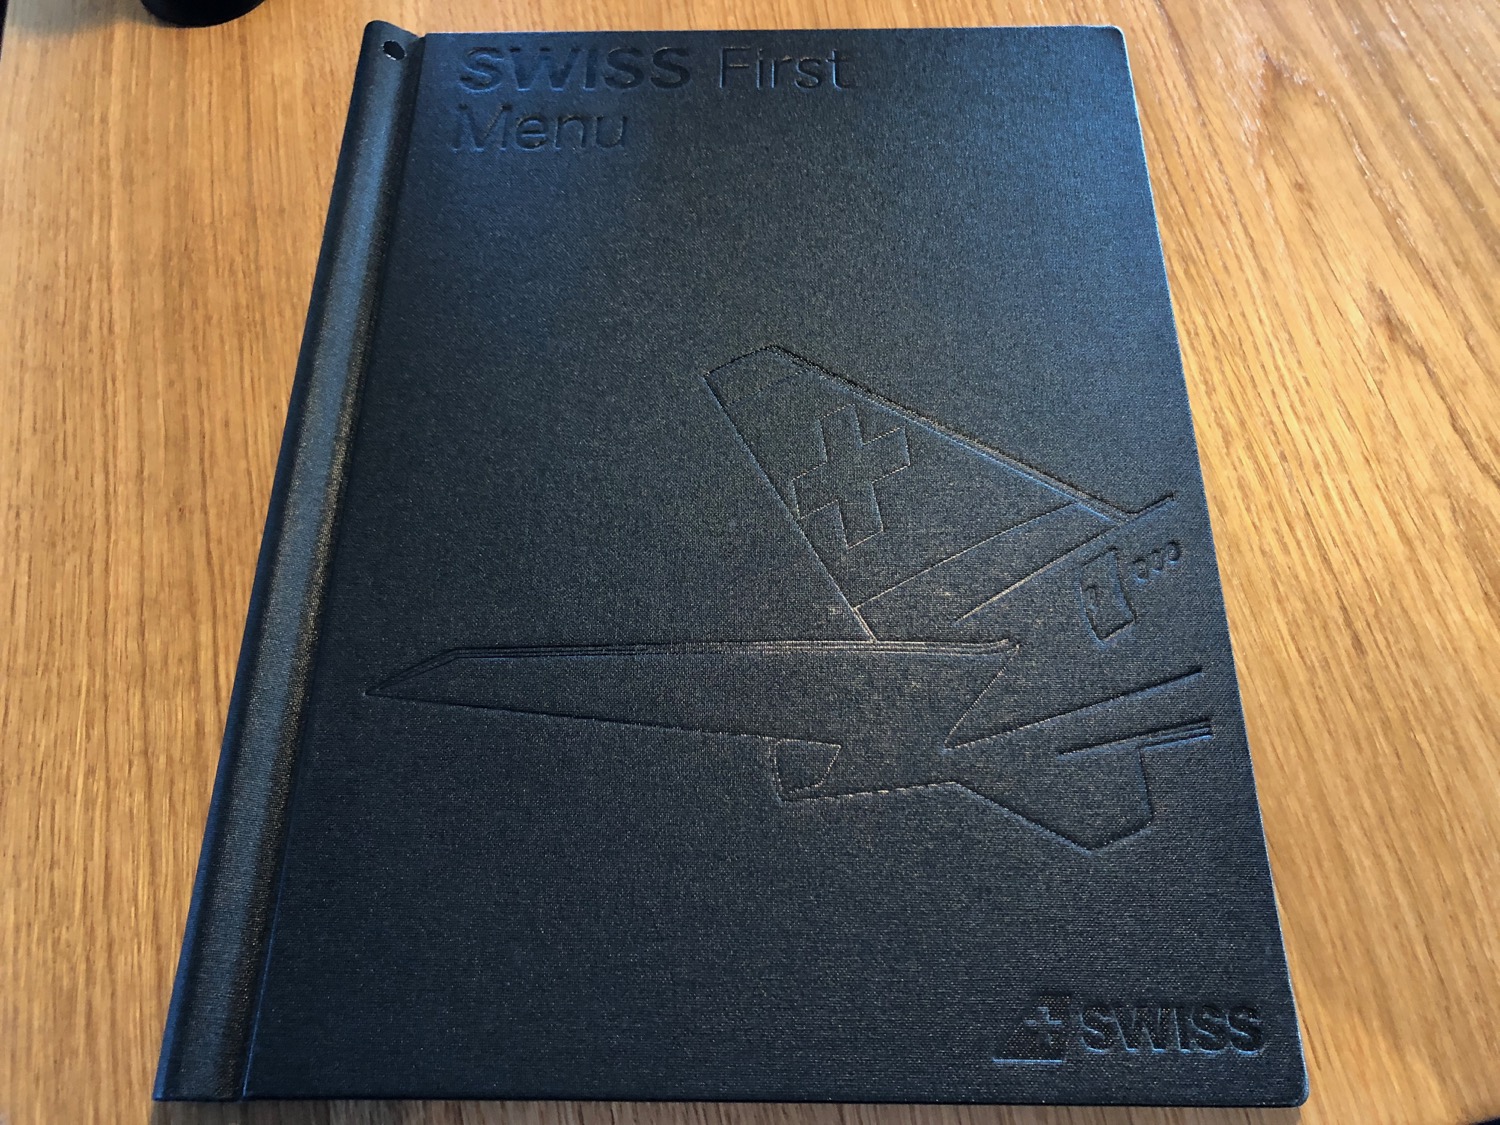 a black menu cover on a wood surface